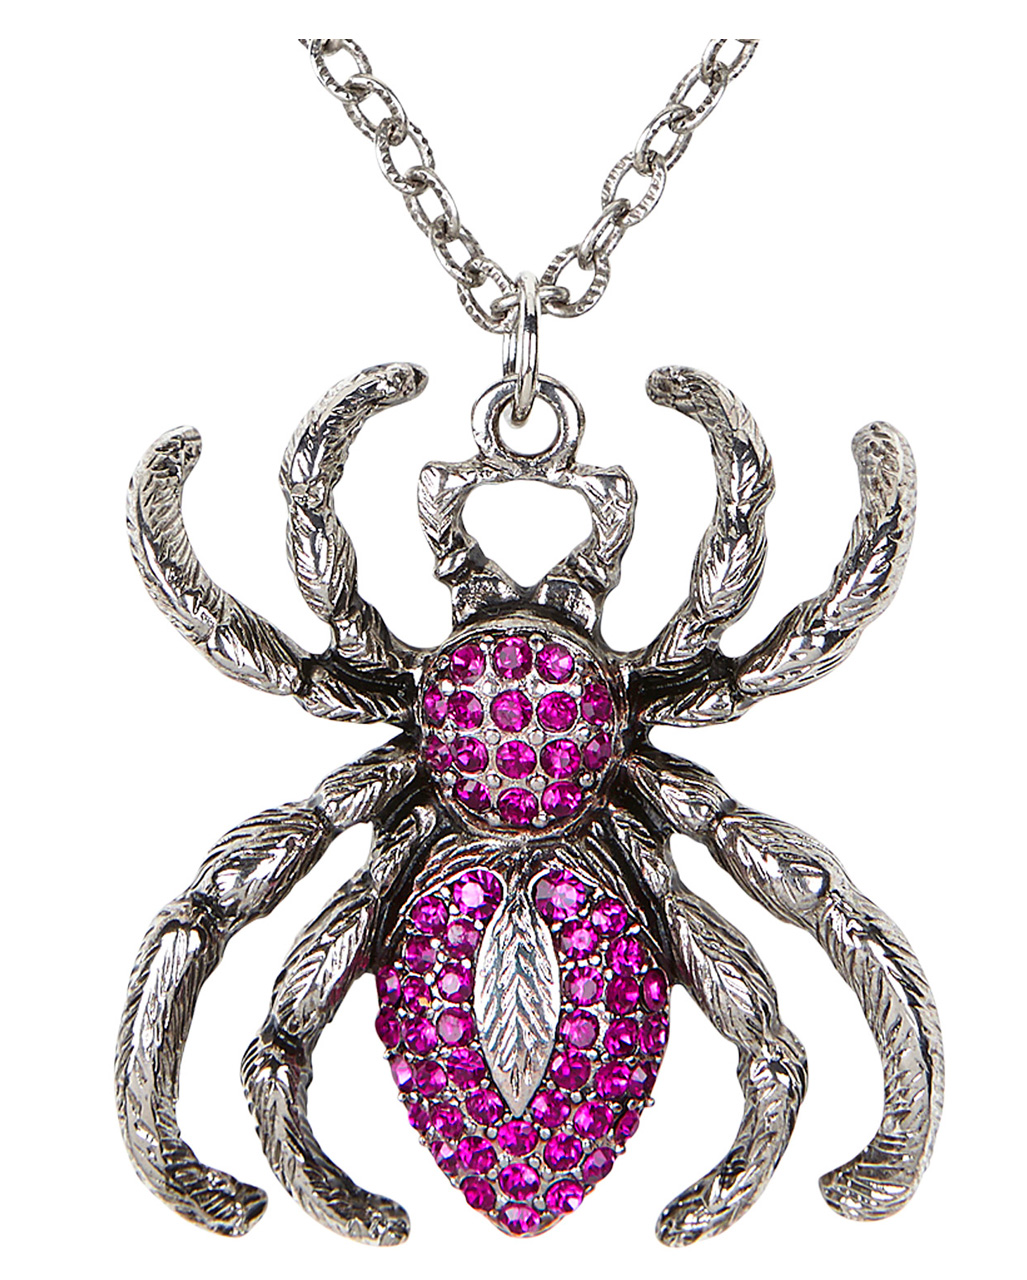 arachnid present witch jewellery bug lover gothic jewelry creepy Crawly necklace insect jewellery Halloween jewelry Spider necklace